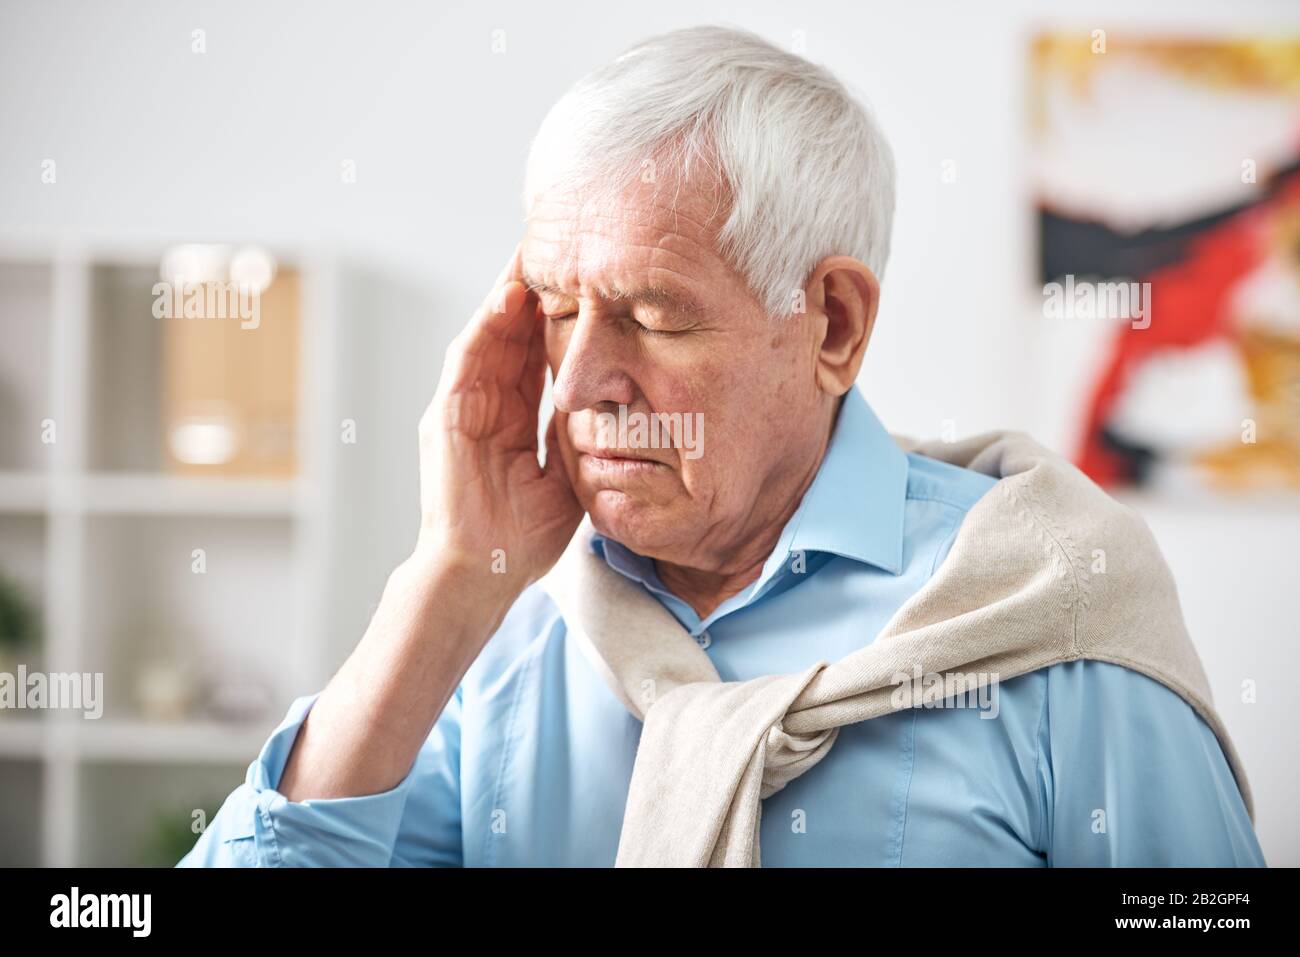 Exhausted senior white-haired man with closed eyes touching temple while feeling headache Stock Photo